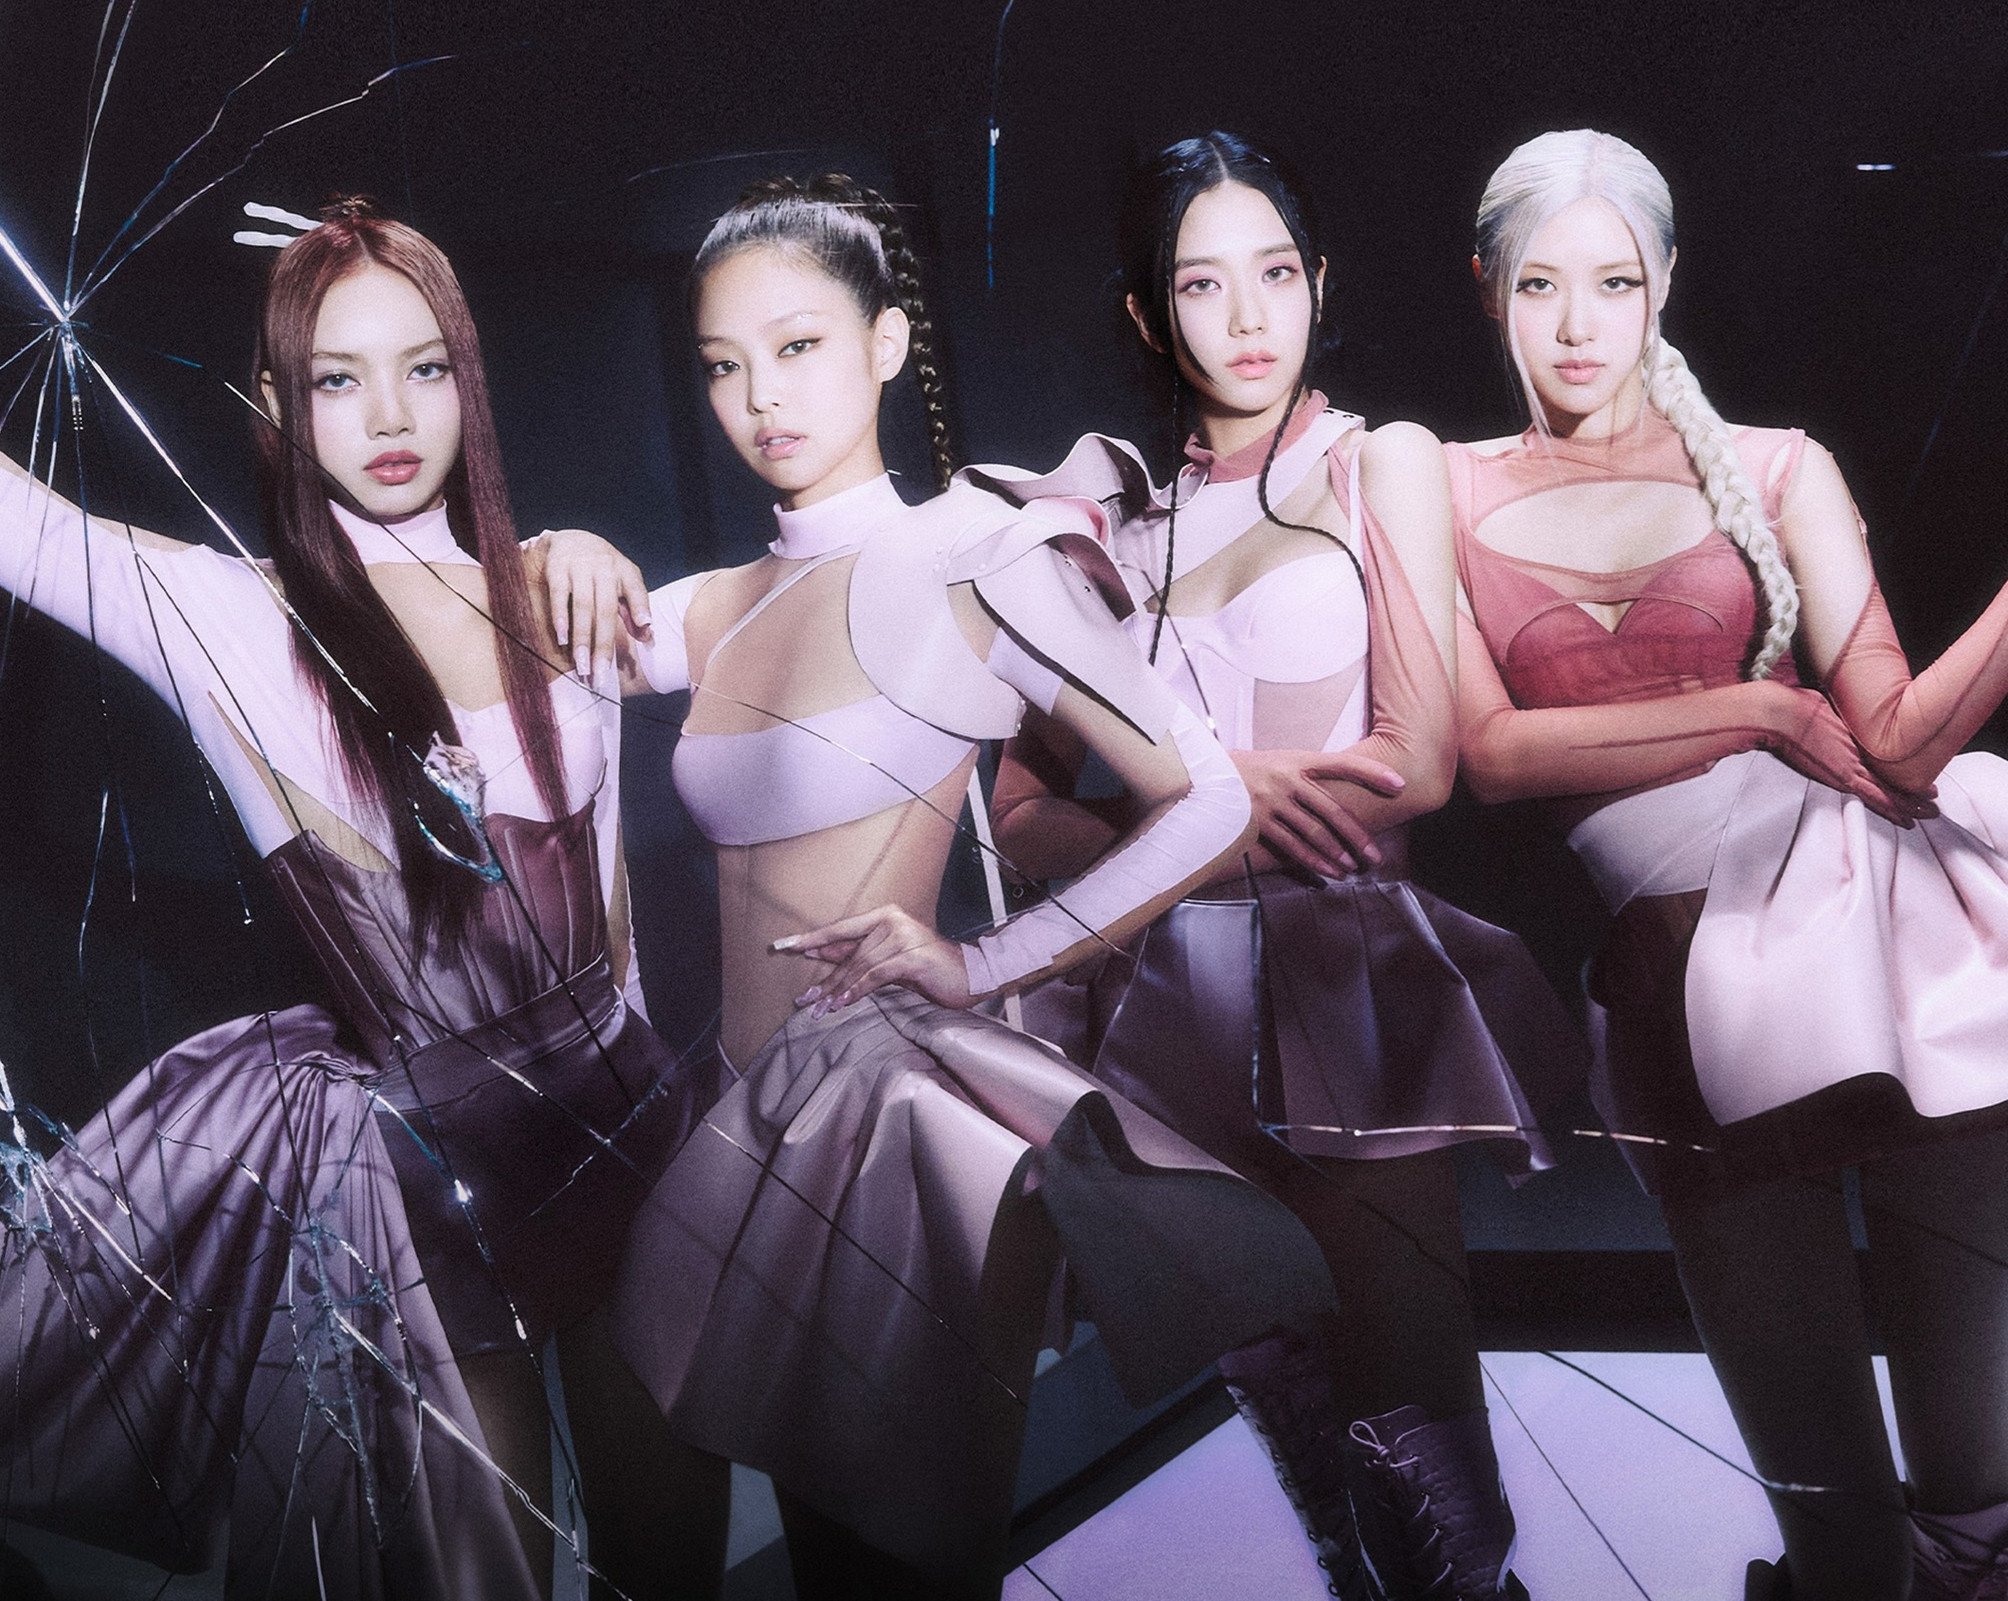 Blackpink concert chaos: the K-pop queens' comeback Born Pink World Tour lands in Hong Kong in January 2023, but there's already drama over US$1,300 resale tickets, feuding and disbandment fears … |